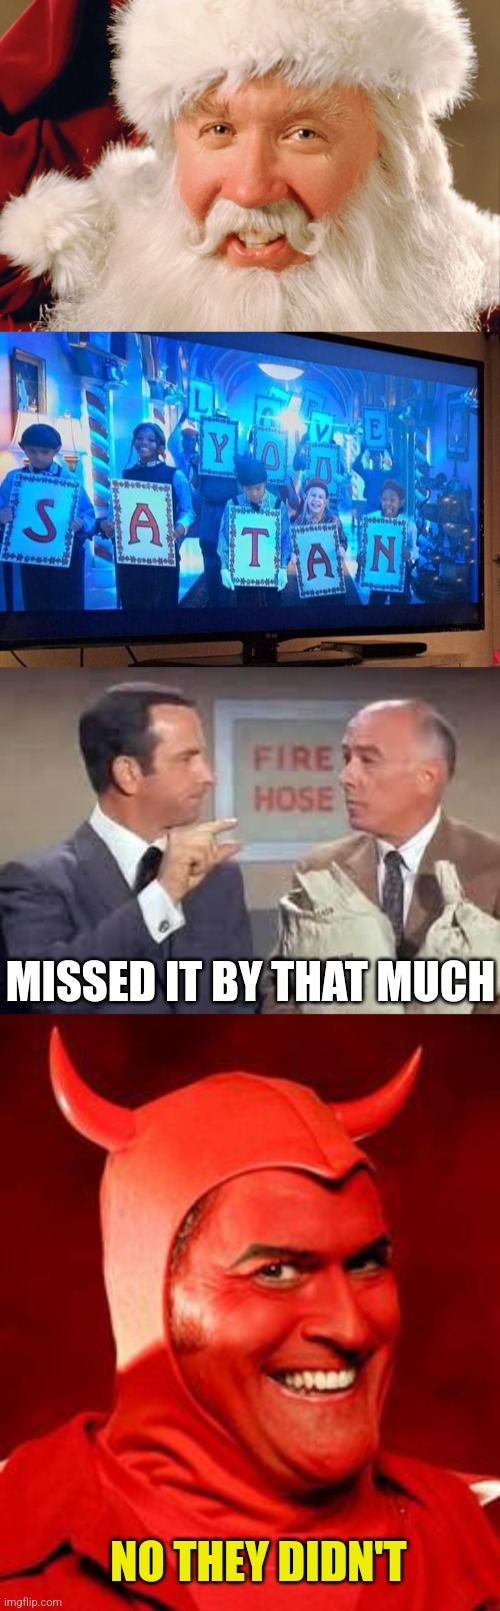 Disney's Freudian Slip? | MISSED IT BY THAT MUCH; NO THEY DIDN'T | image tagged in maxwell smart missed it by that much,devil bruce,santa clause,satan,disney | made w/ Imgflip meme maker